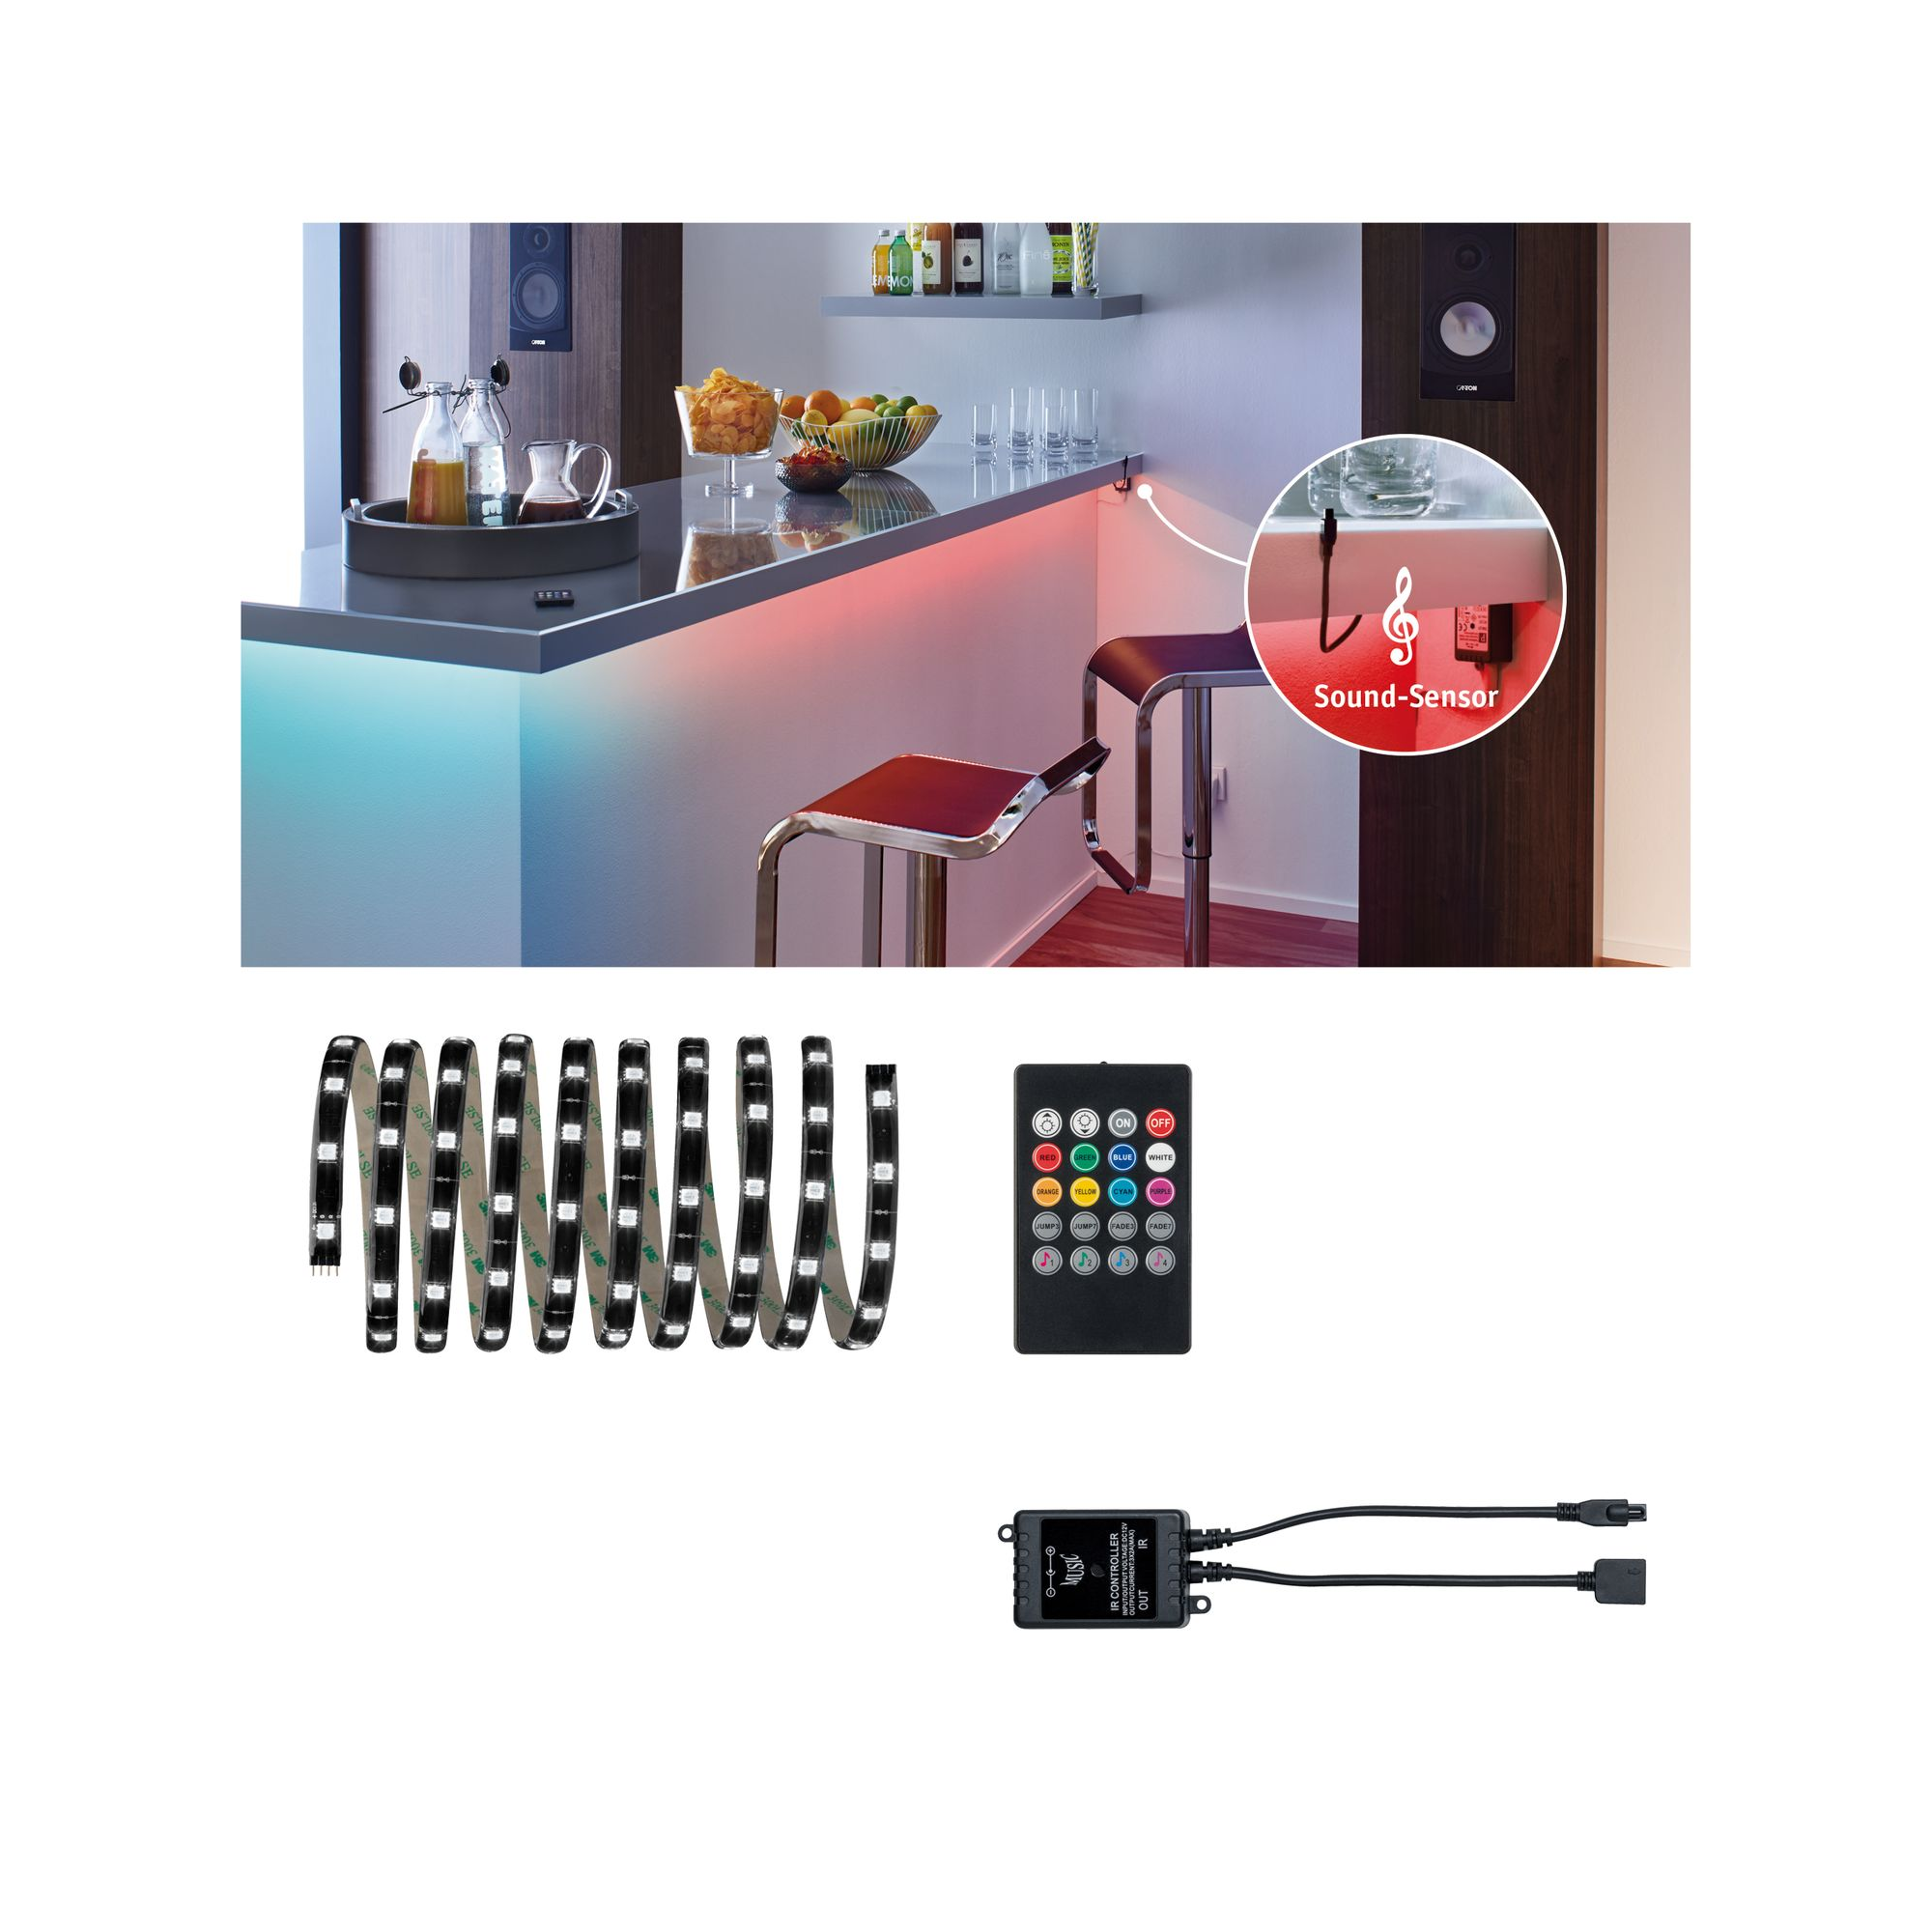 LED-Set 'YourLED Comfort' 3 m 17,8 W RGB schwarz + product picture